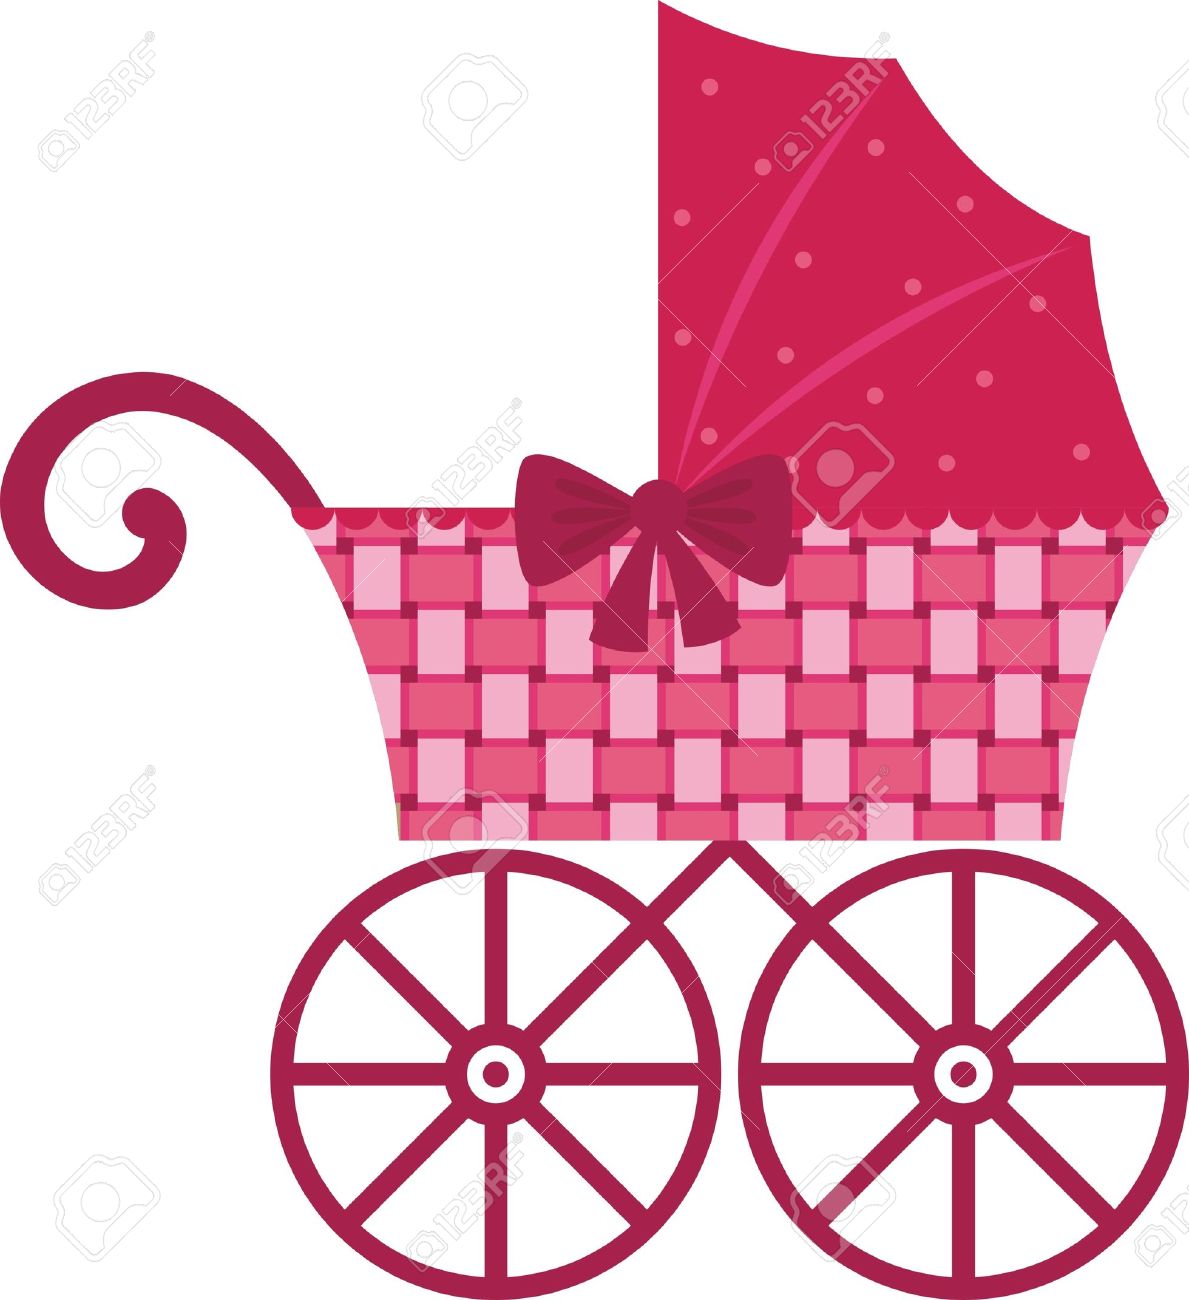 330 Baby Carriage free clipart.